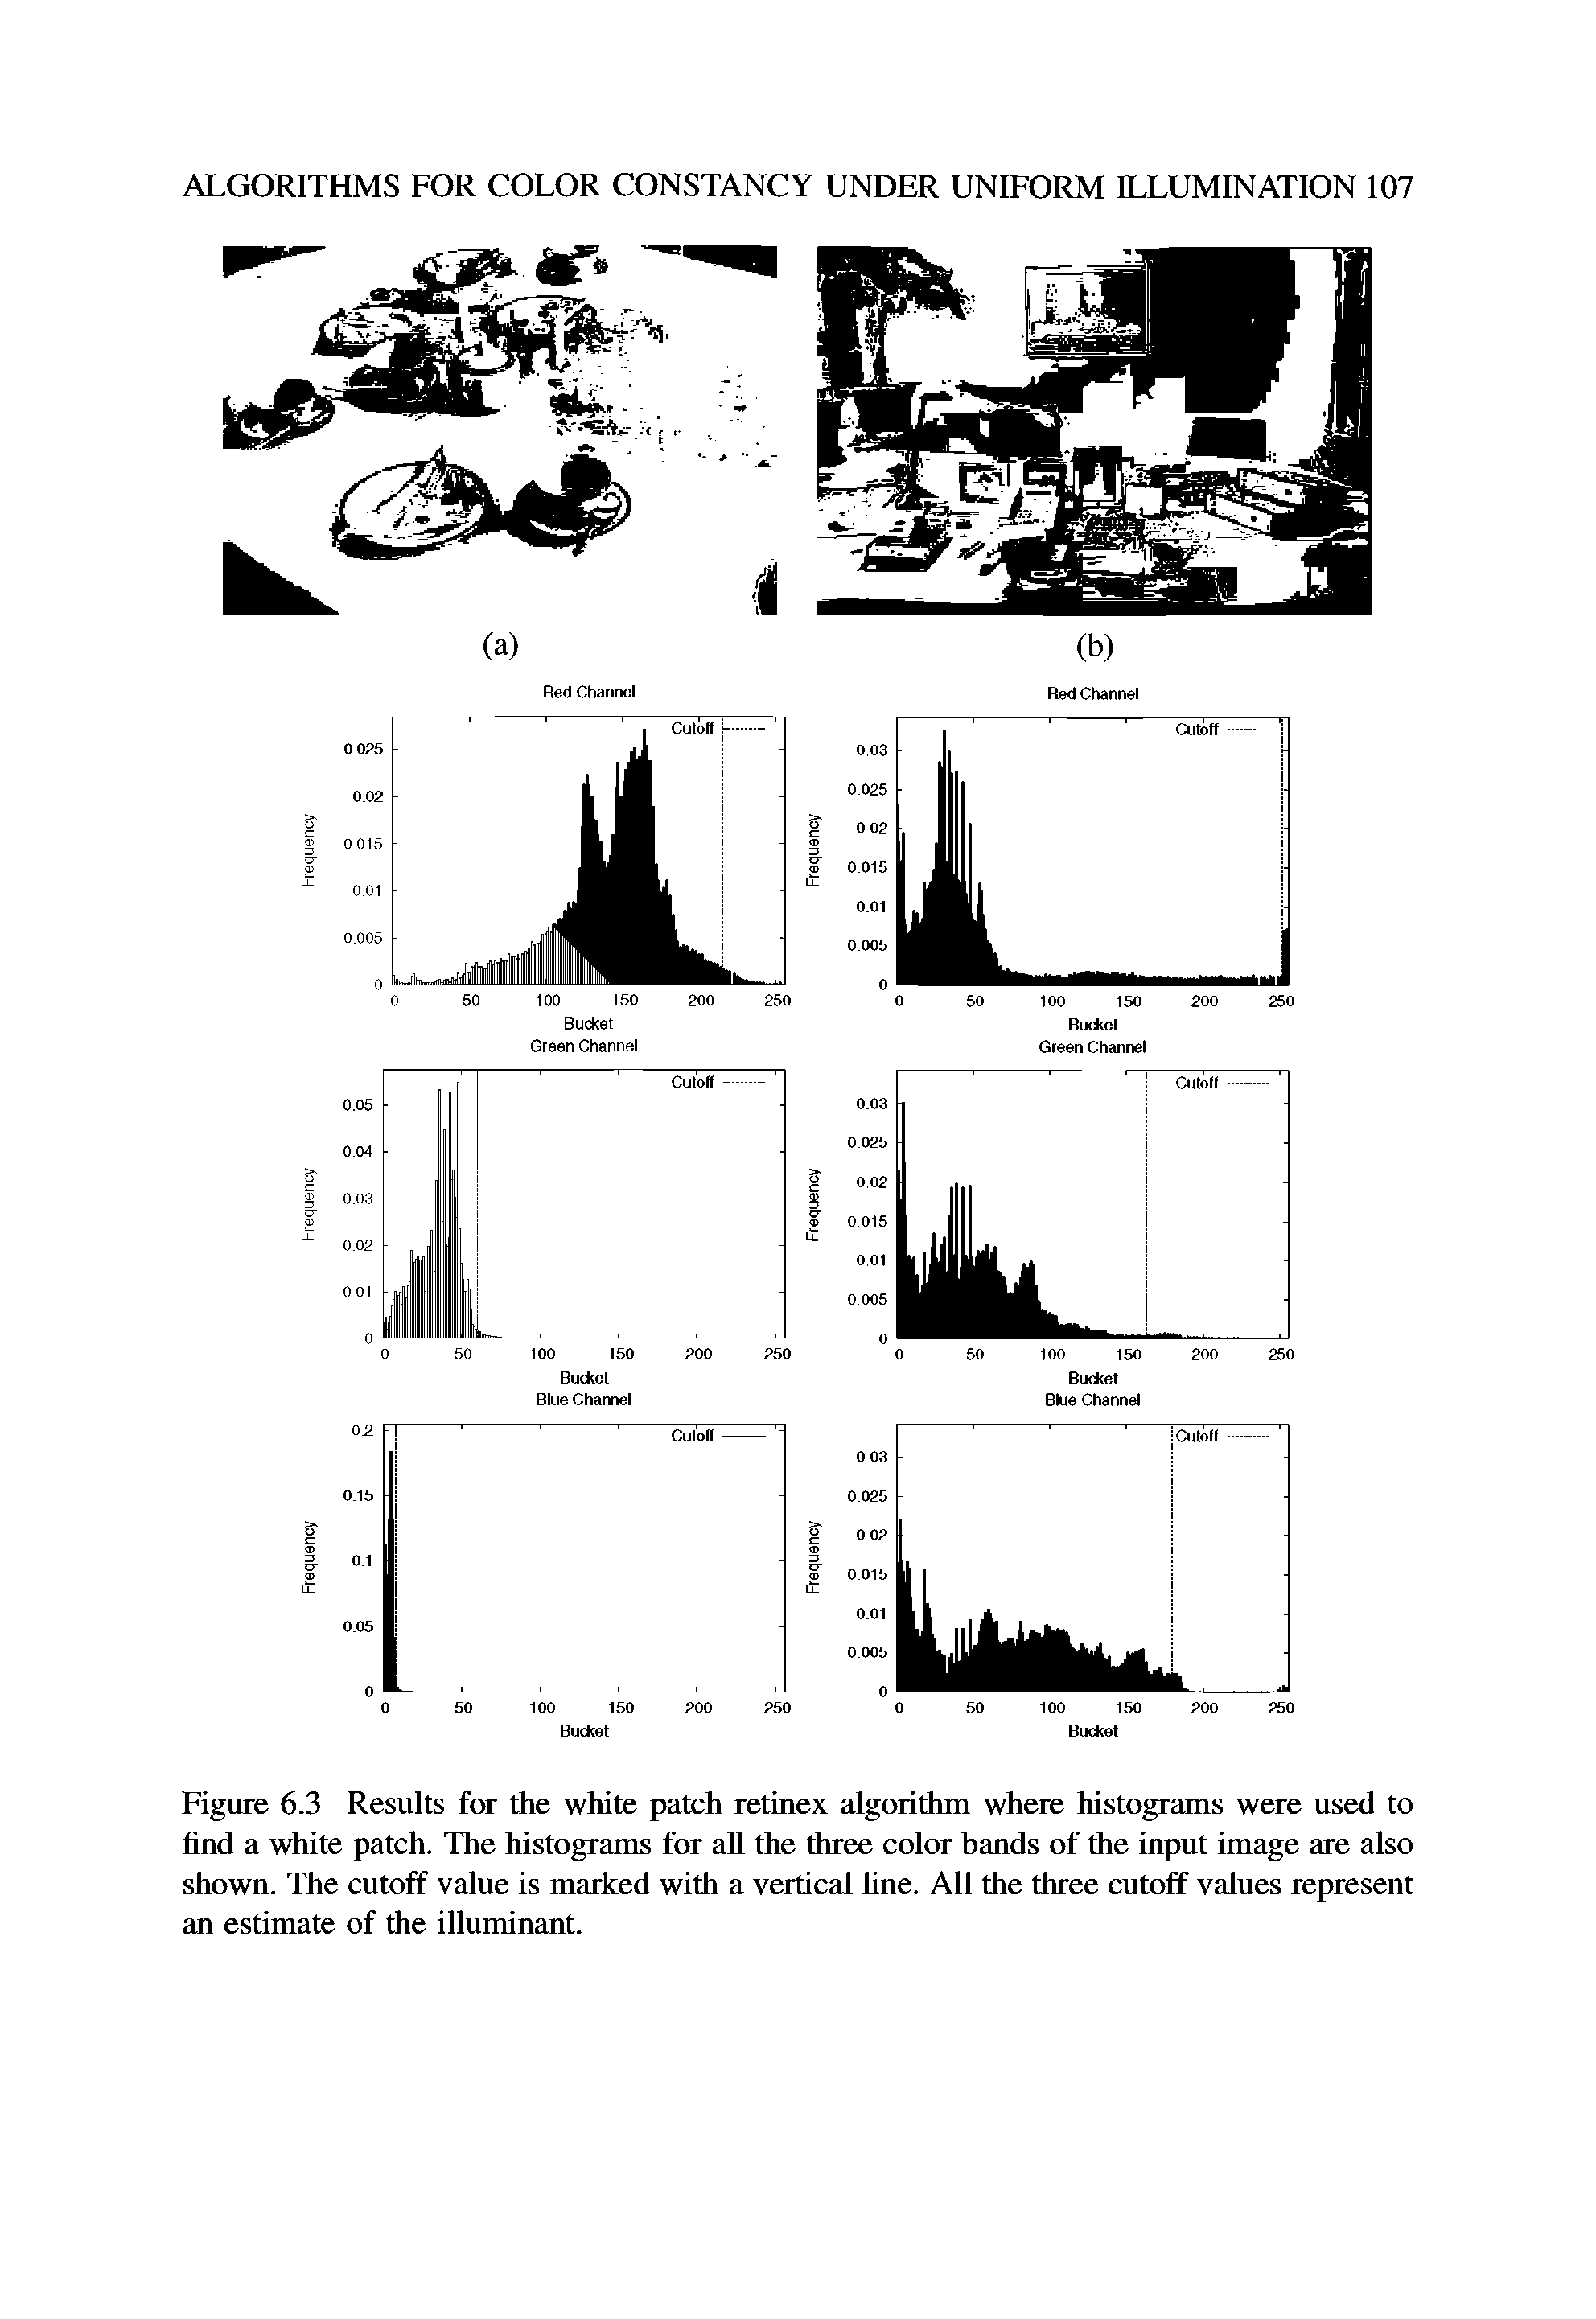 Figure 6.3 Results for the white patch retinex algorithm where histograms were used to find a white patch. The histograms for all the three color bands of the input image are also shown. The cutoff value is marked with a vertical line. All the three cutoff values represent an estimate of the illuminant.